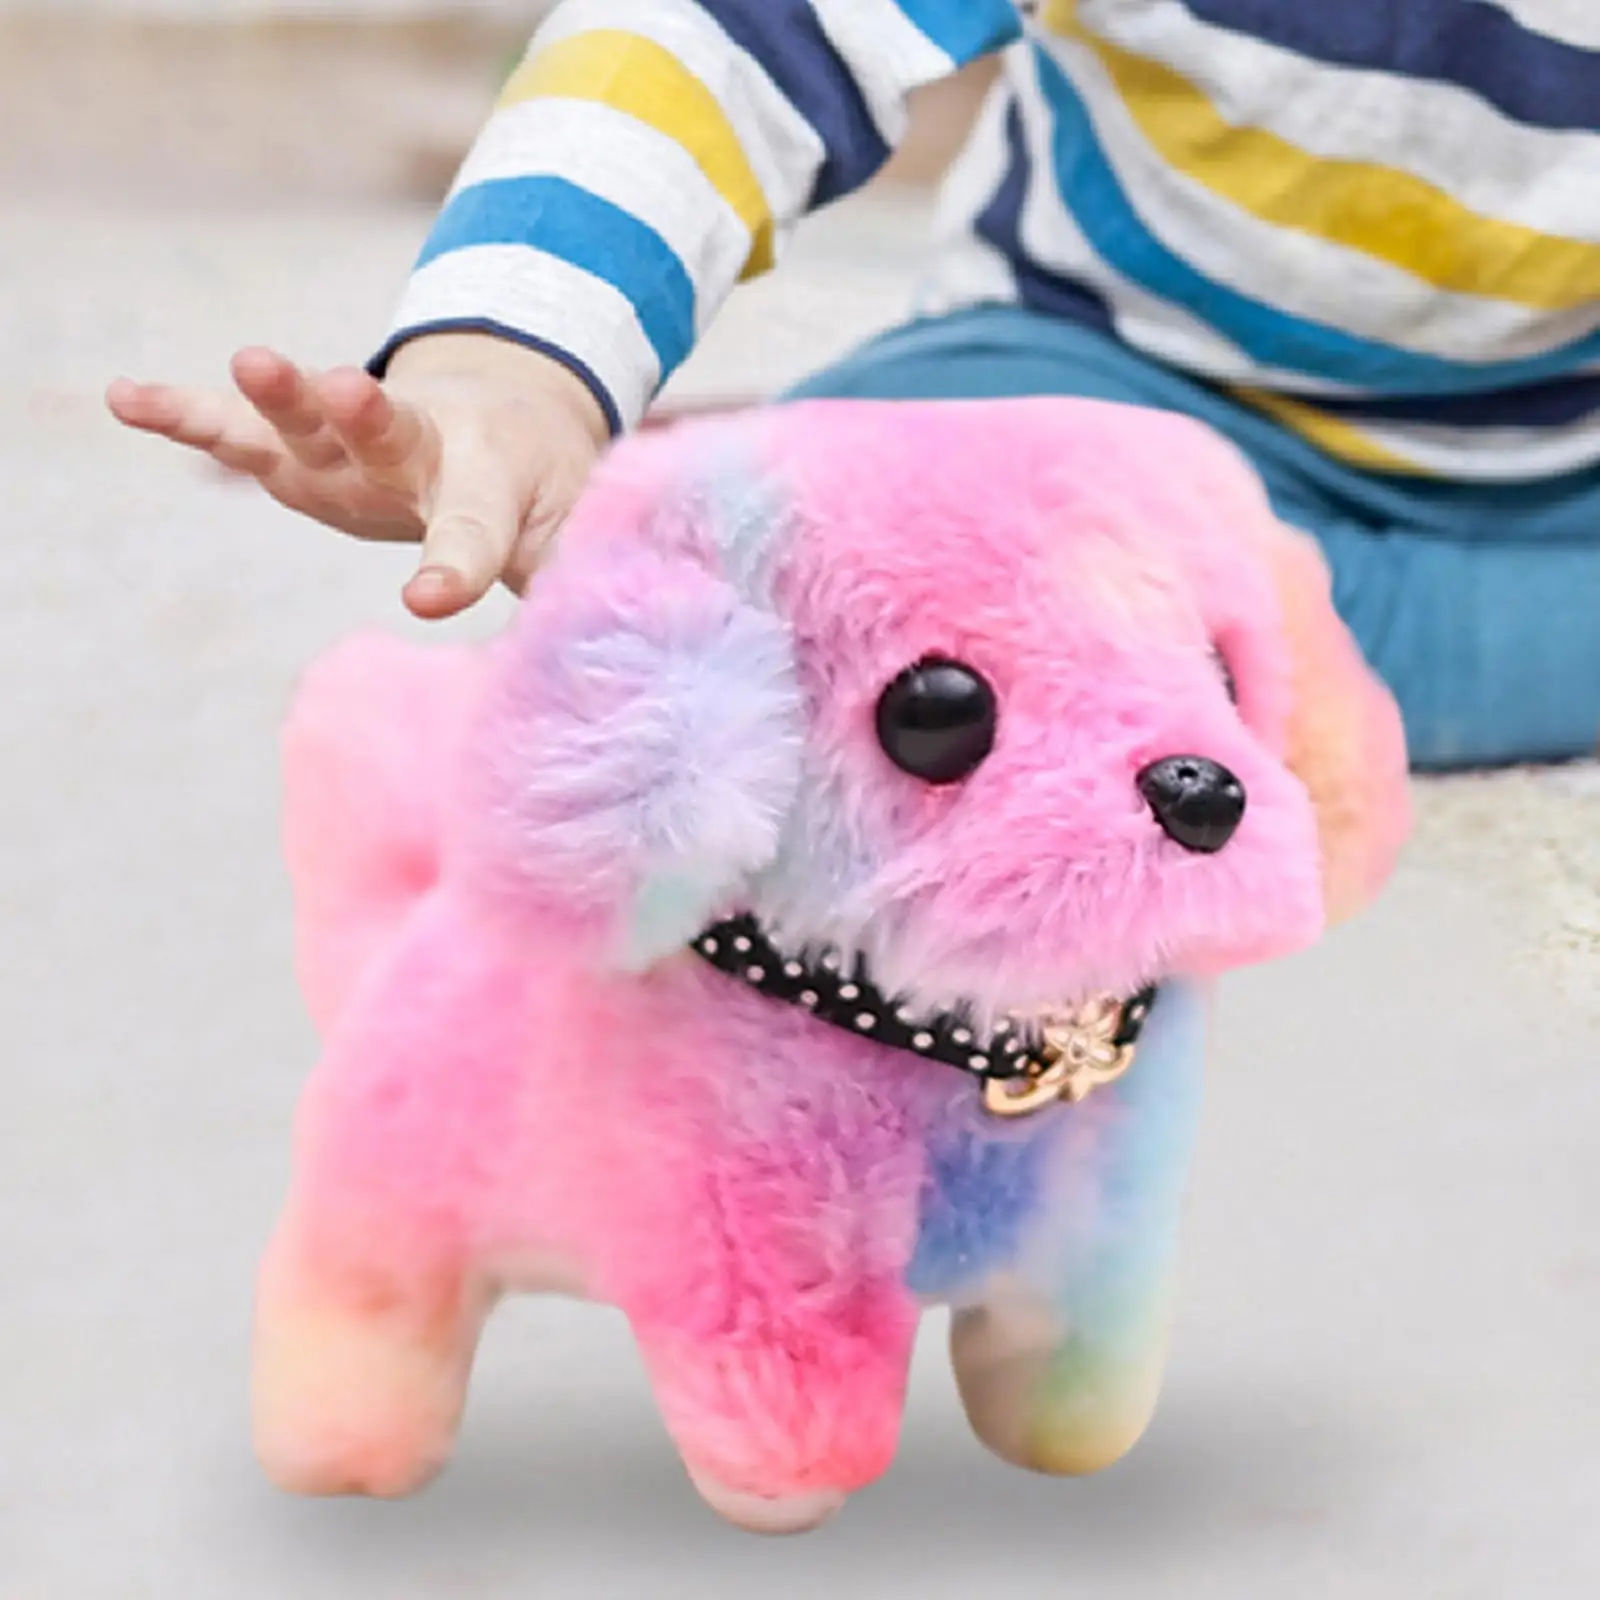 Electronic Pet Lifelike Adorable Stuffed Animals Walking Toy for New Year Gifts Party Favor Kids Toys Xmas Present Toddler